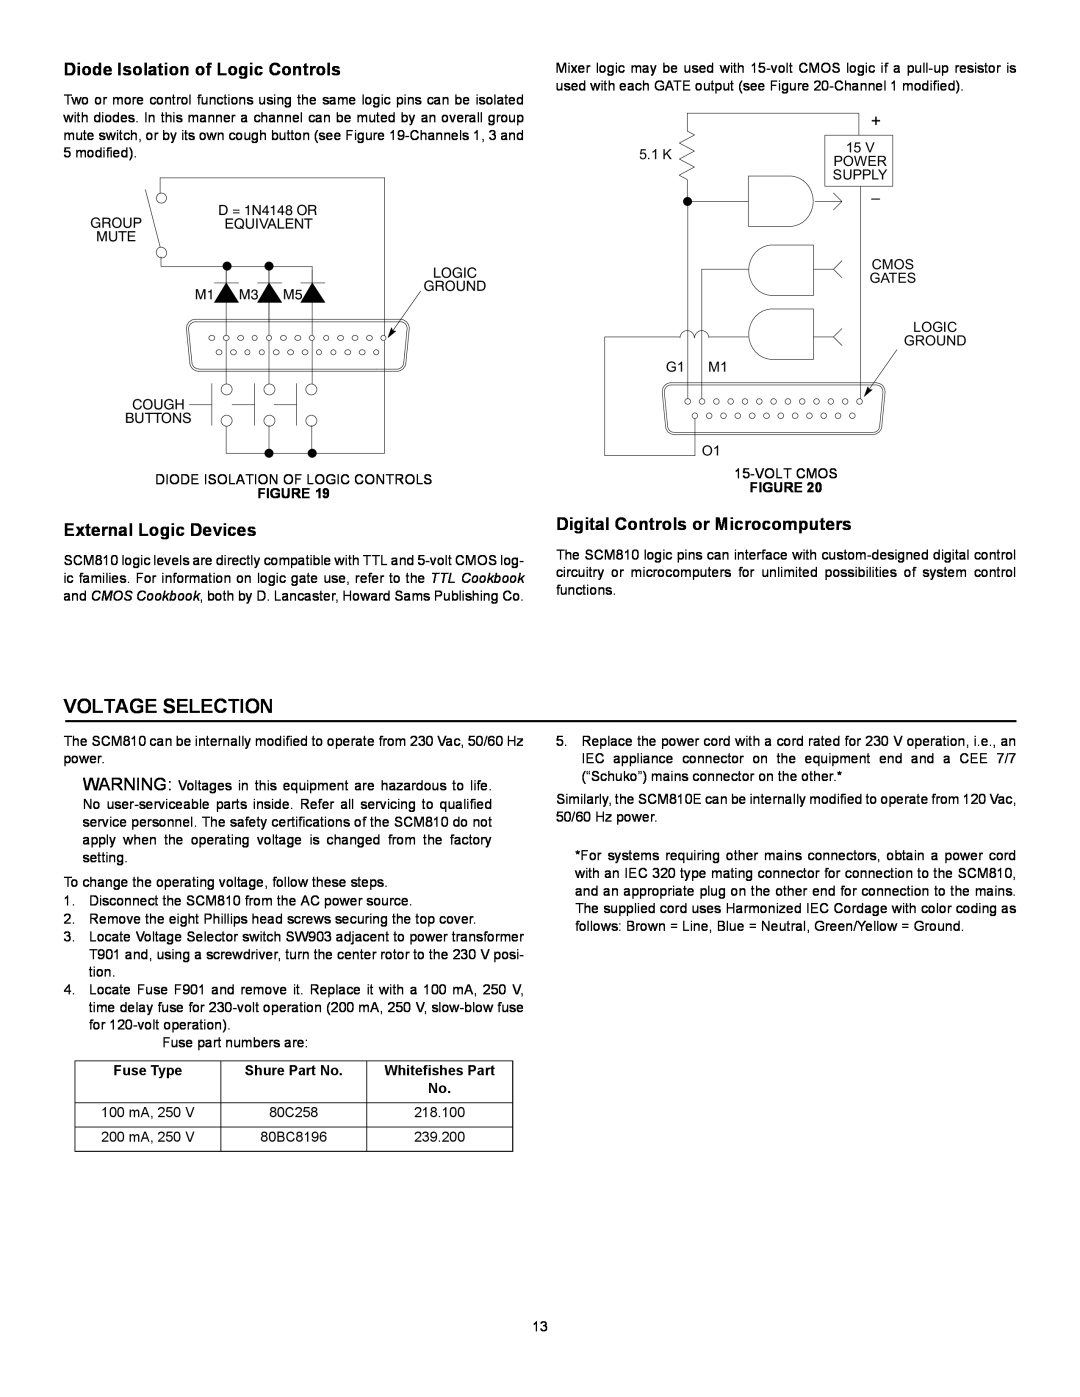 Shure SCM810 manual Voltage Selection, Diode Isolation of Logic Controls, External Logic Devices 